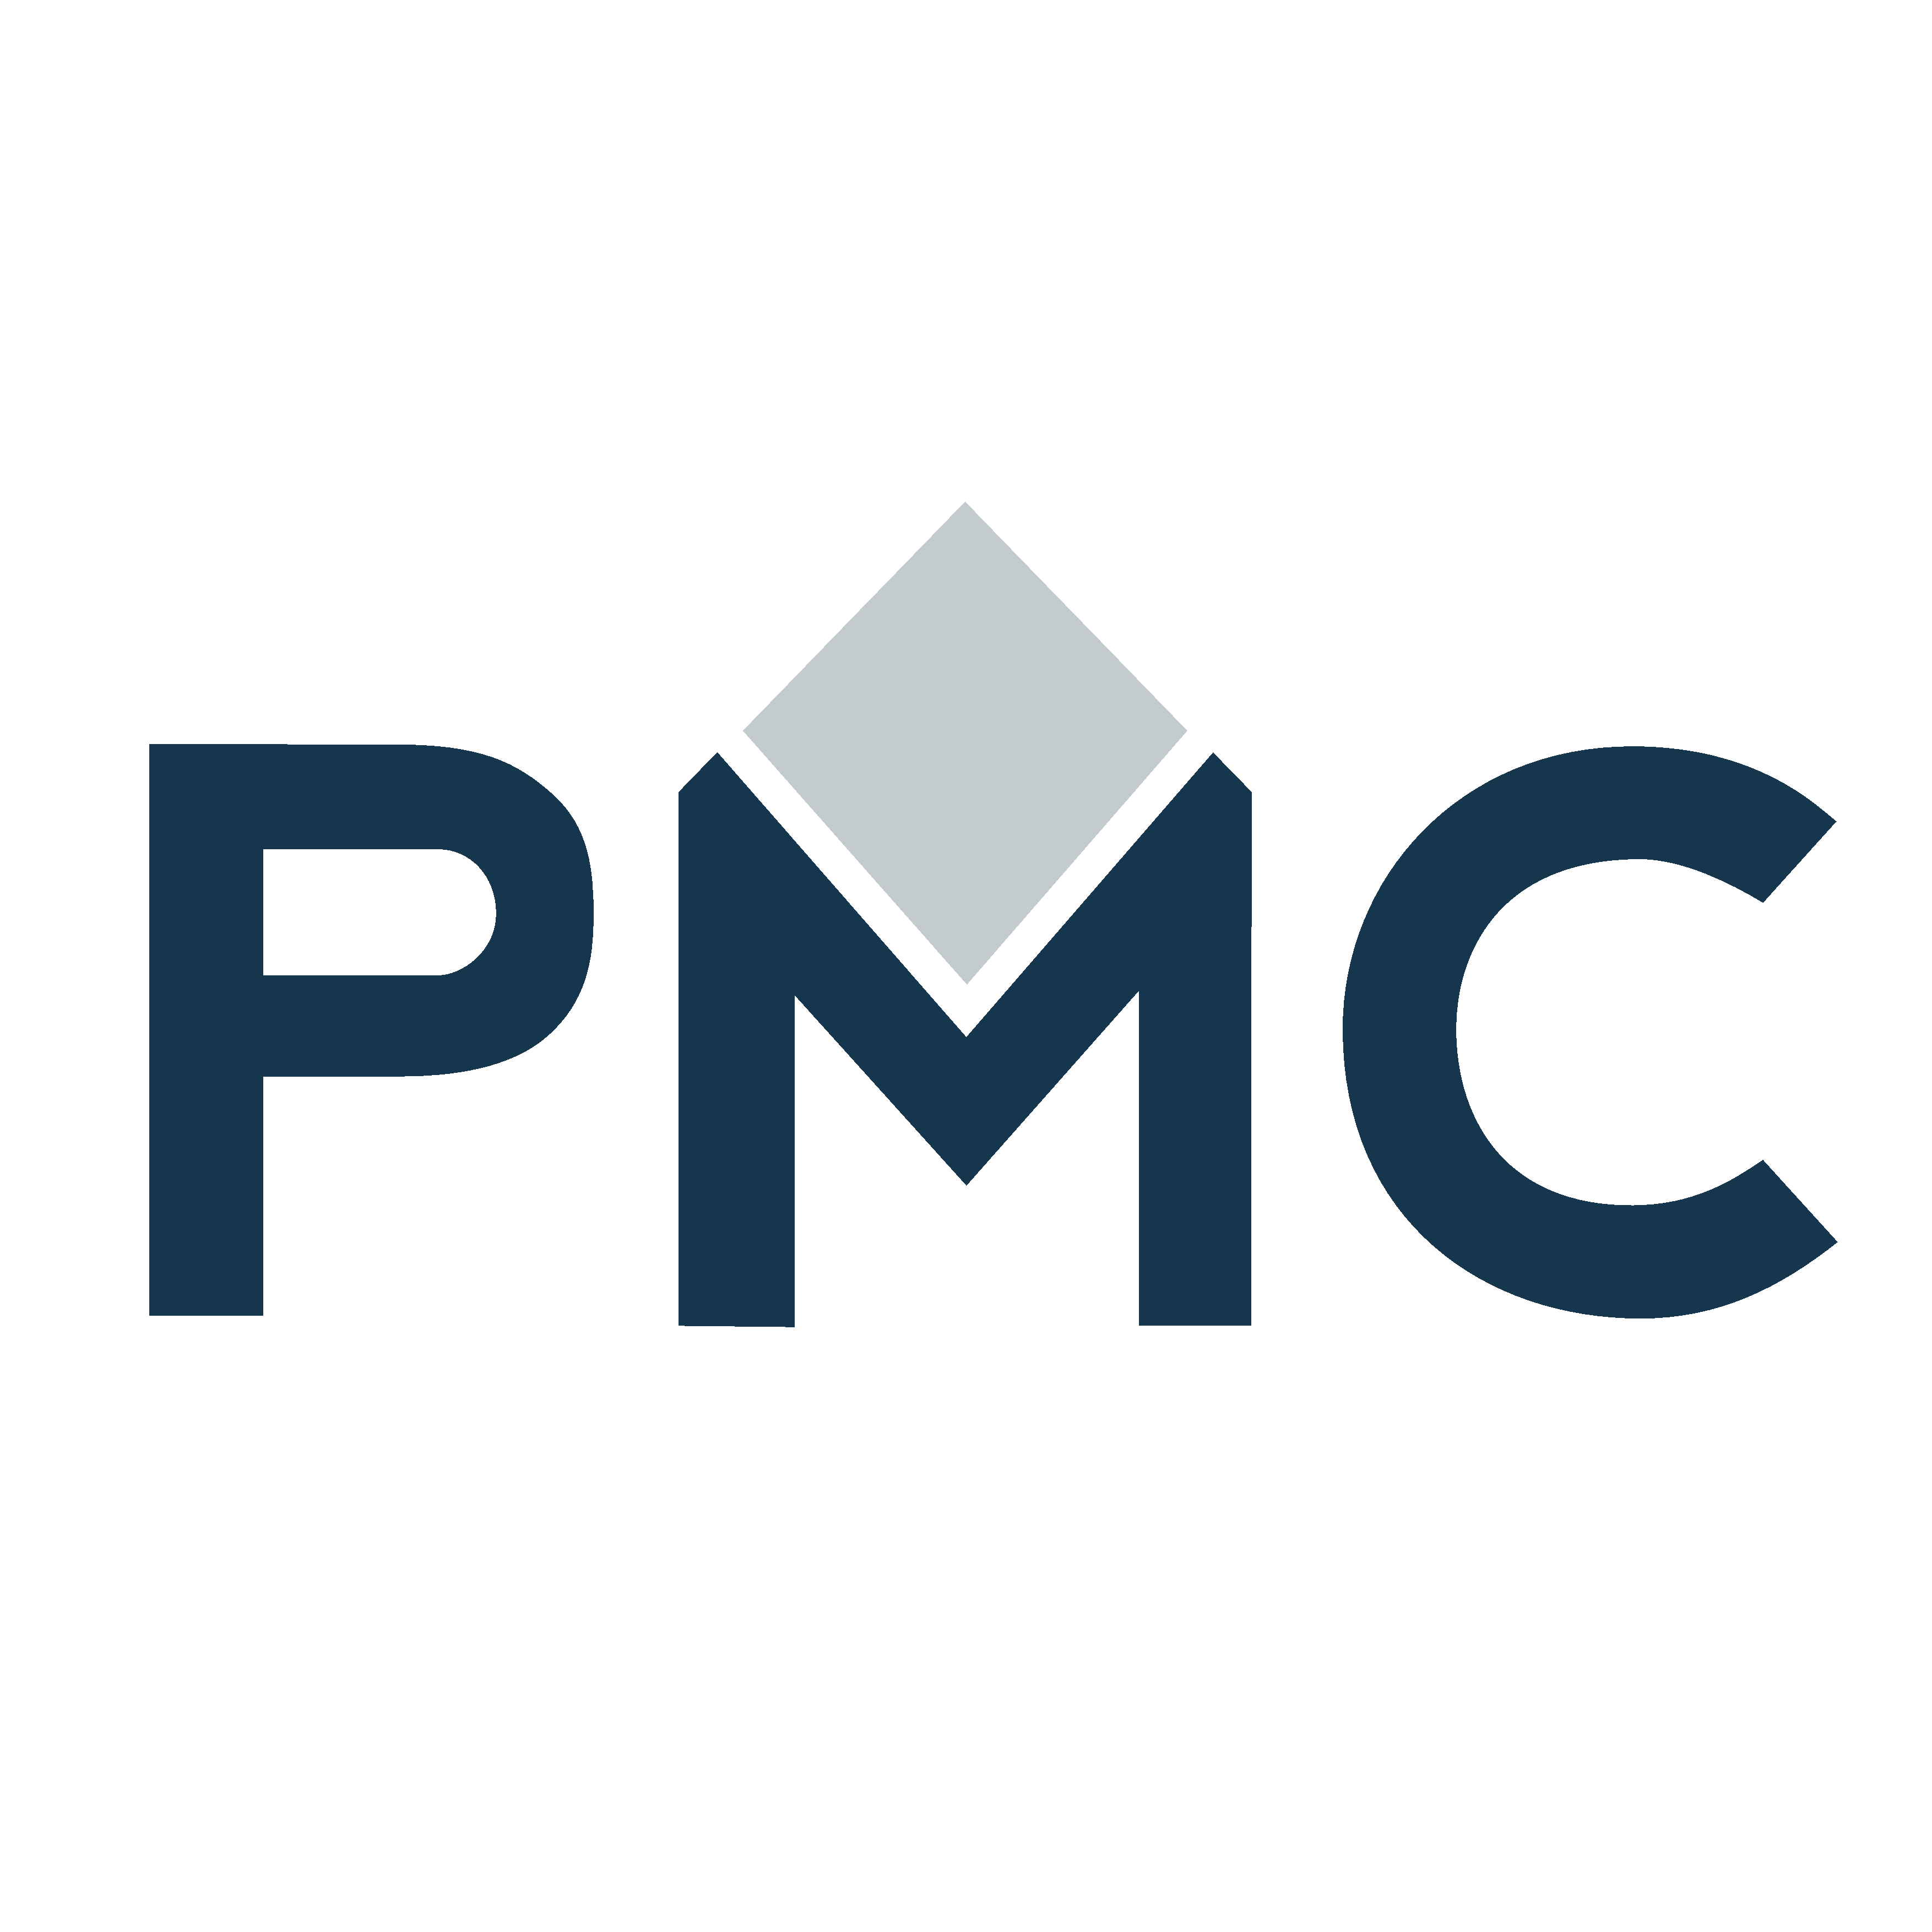 Pinnacle Management Consulting is a consulting practice specializing in leadership development and organizational health for businesses throughout Indonesia.